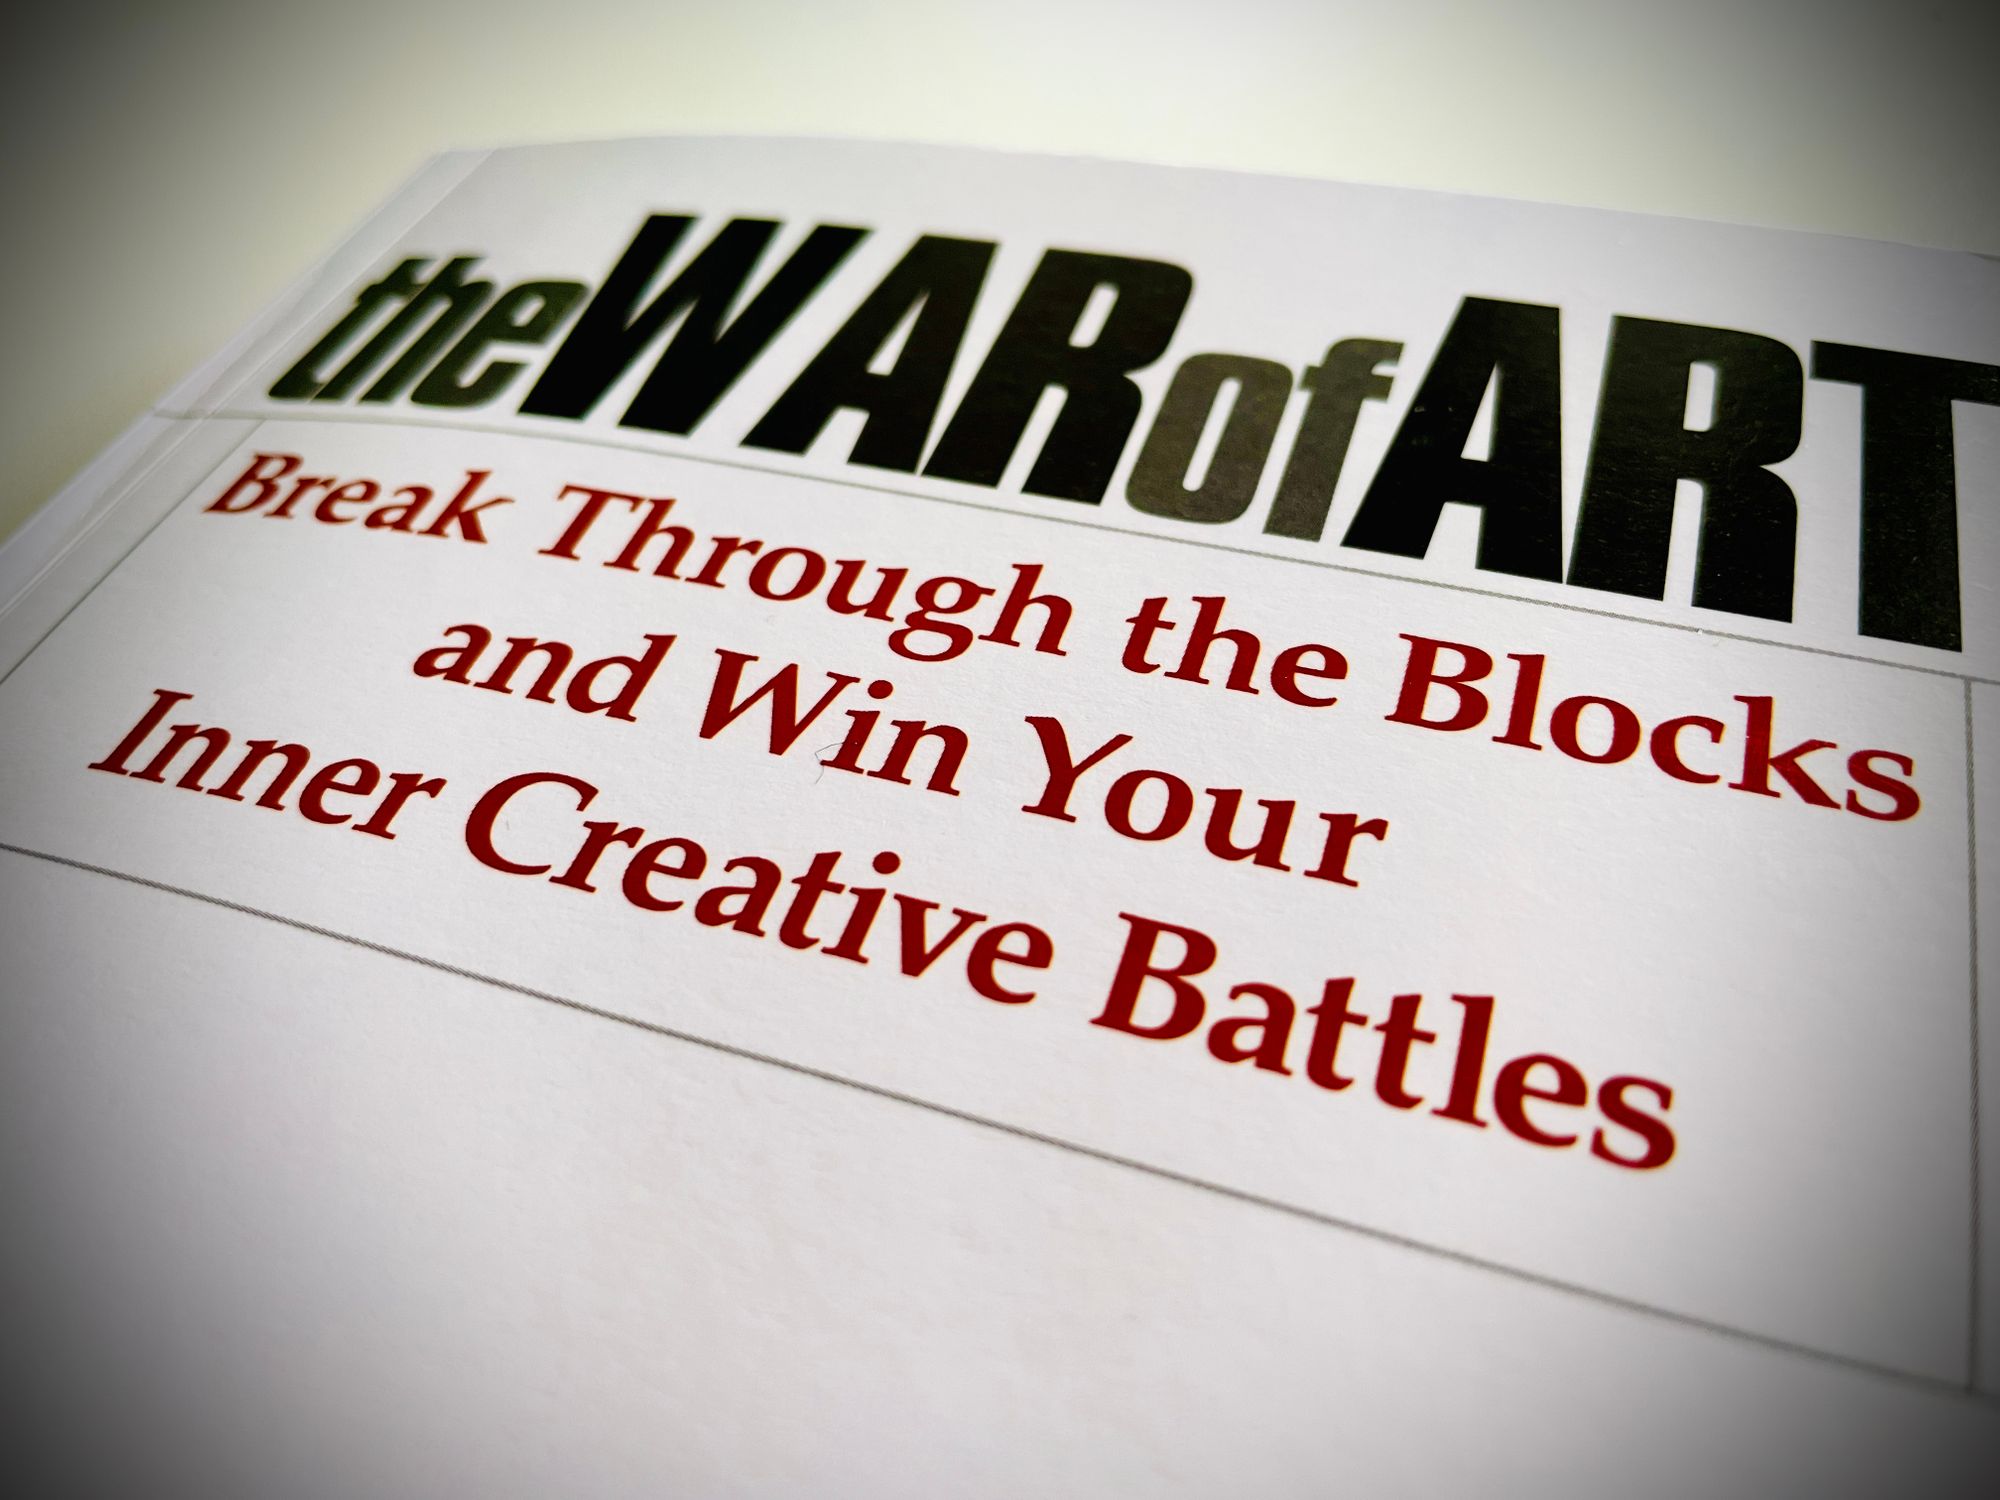 Summary Analysis Of The War of Art: Break Through the Blocks and Win Your  Inner Creative Battles By Steven Pressfield (Paperback)